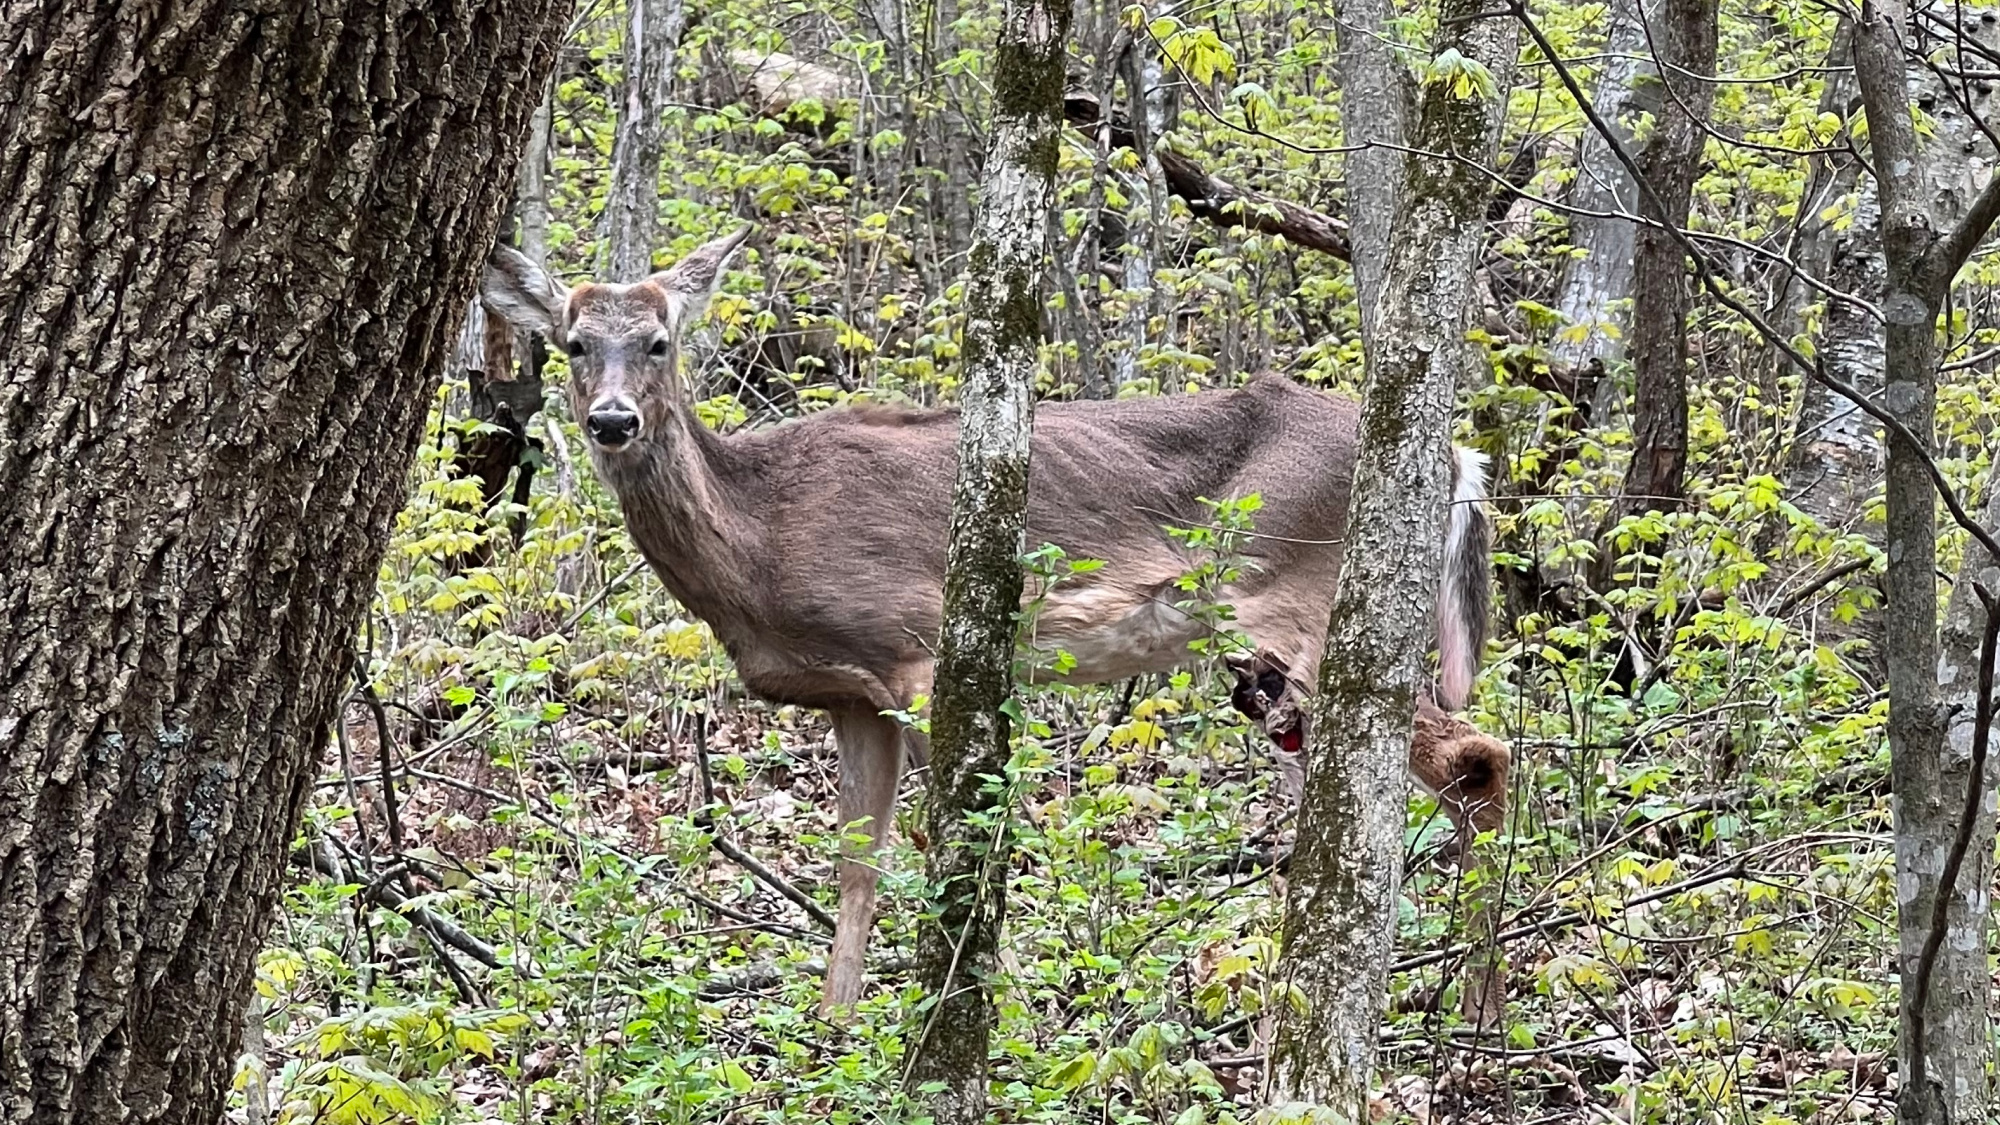 A deer with chronic wasting disease walks through a forest.